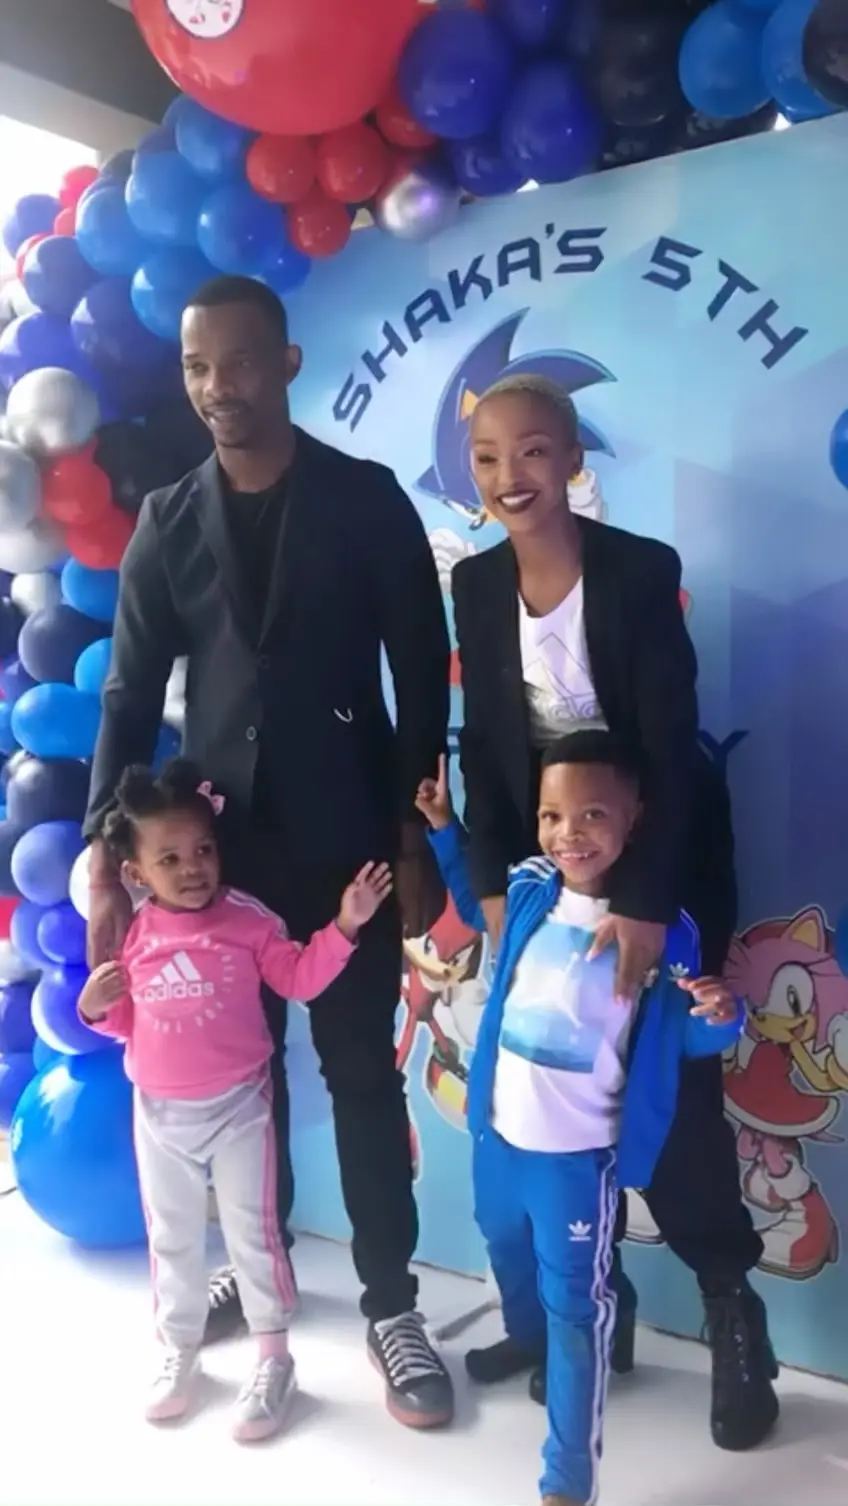 Social media is very toxic for children – Nandi Madida